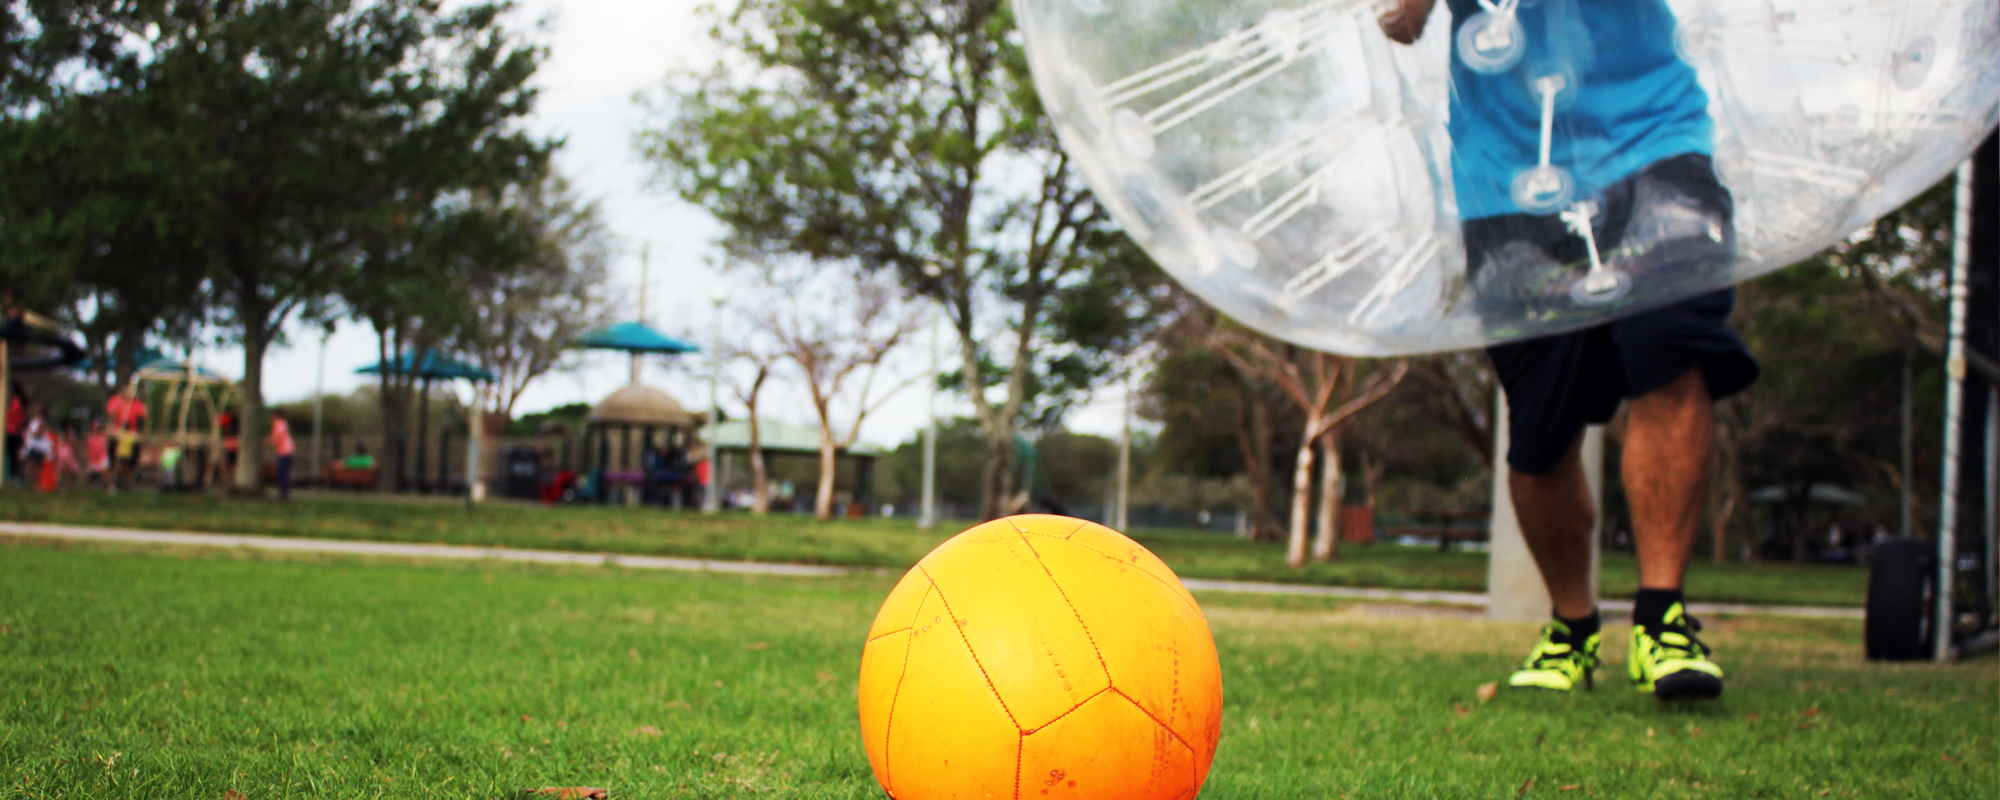 Join the <span>Bubble Soccer</span> craze sweeping South Florida